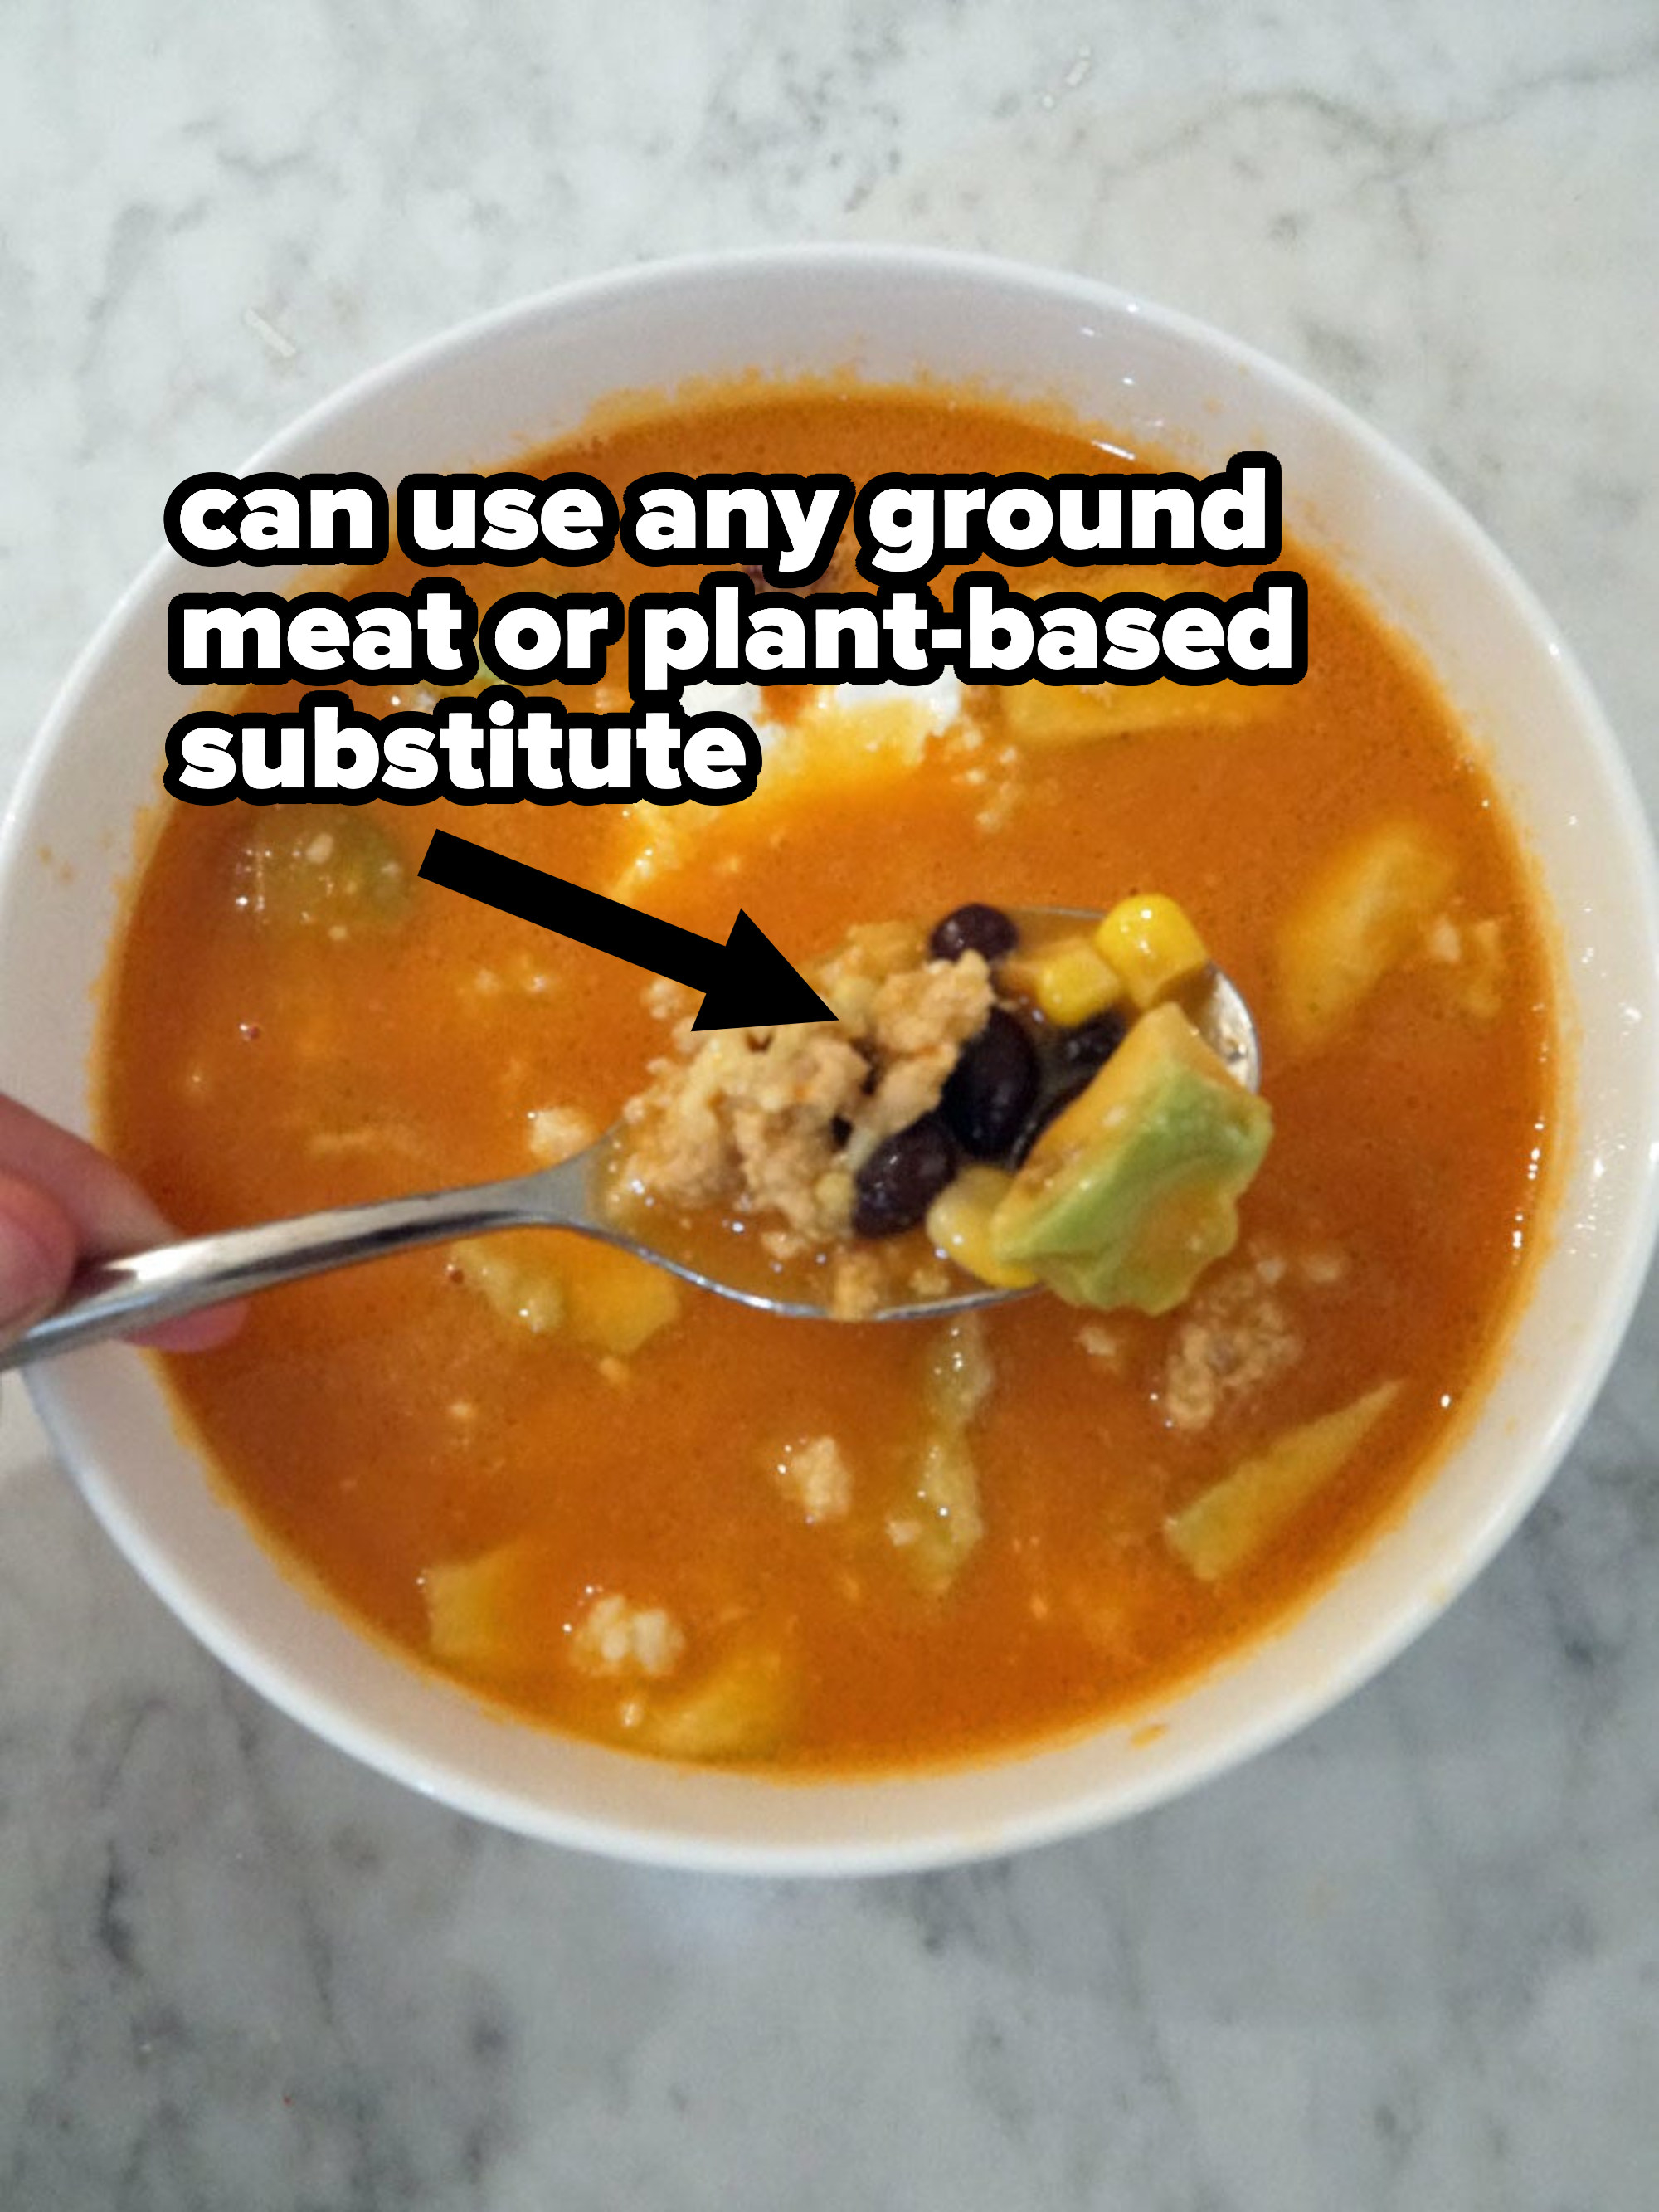 A scoop of tomato soup with beans, corn, ground chicken, and avocado.